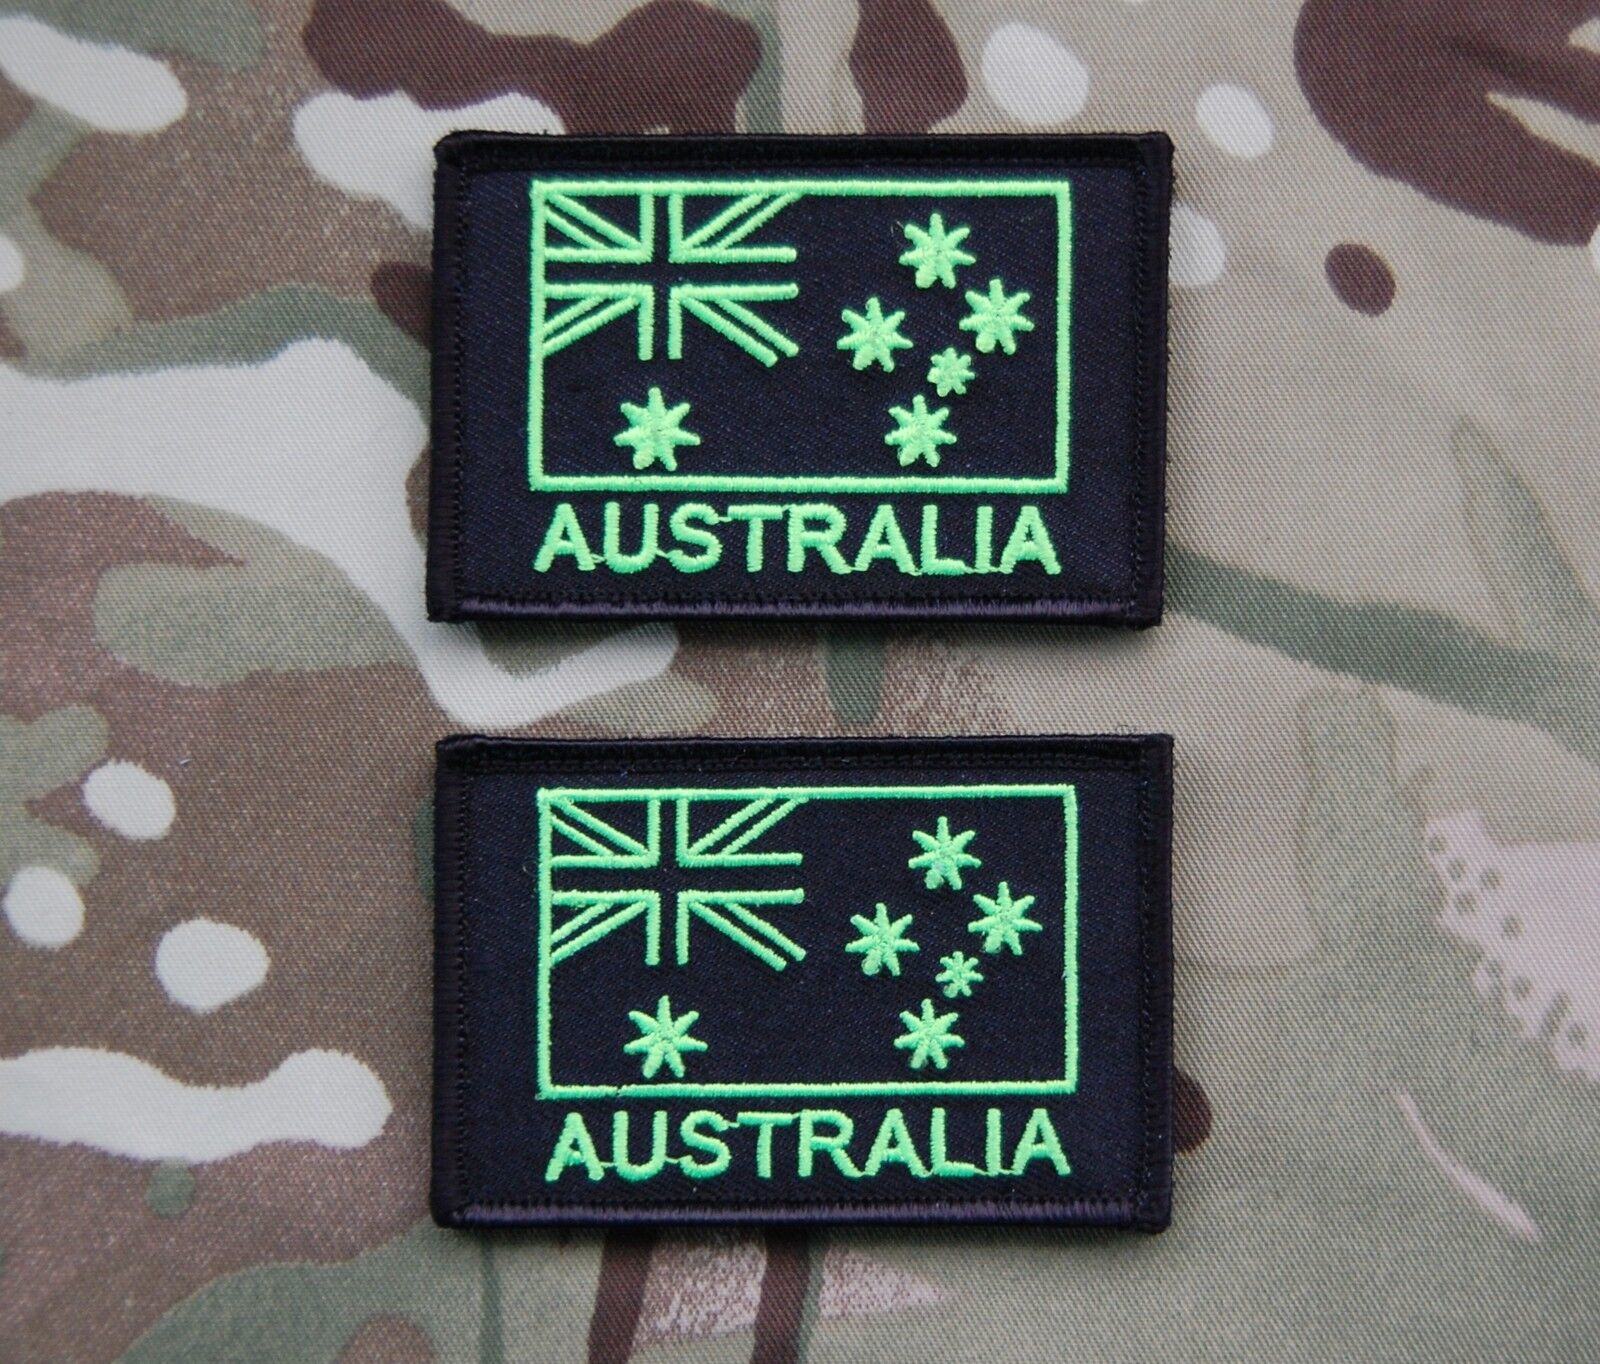 Primary image for 2 x Lime Green/Black Australian Flag Embroidery Patch Set Afghanistan SASR SOTG